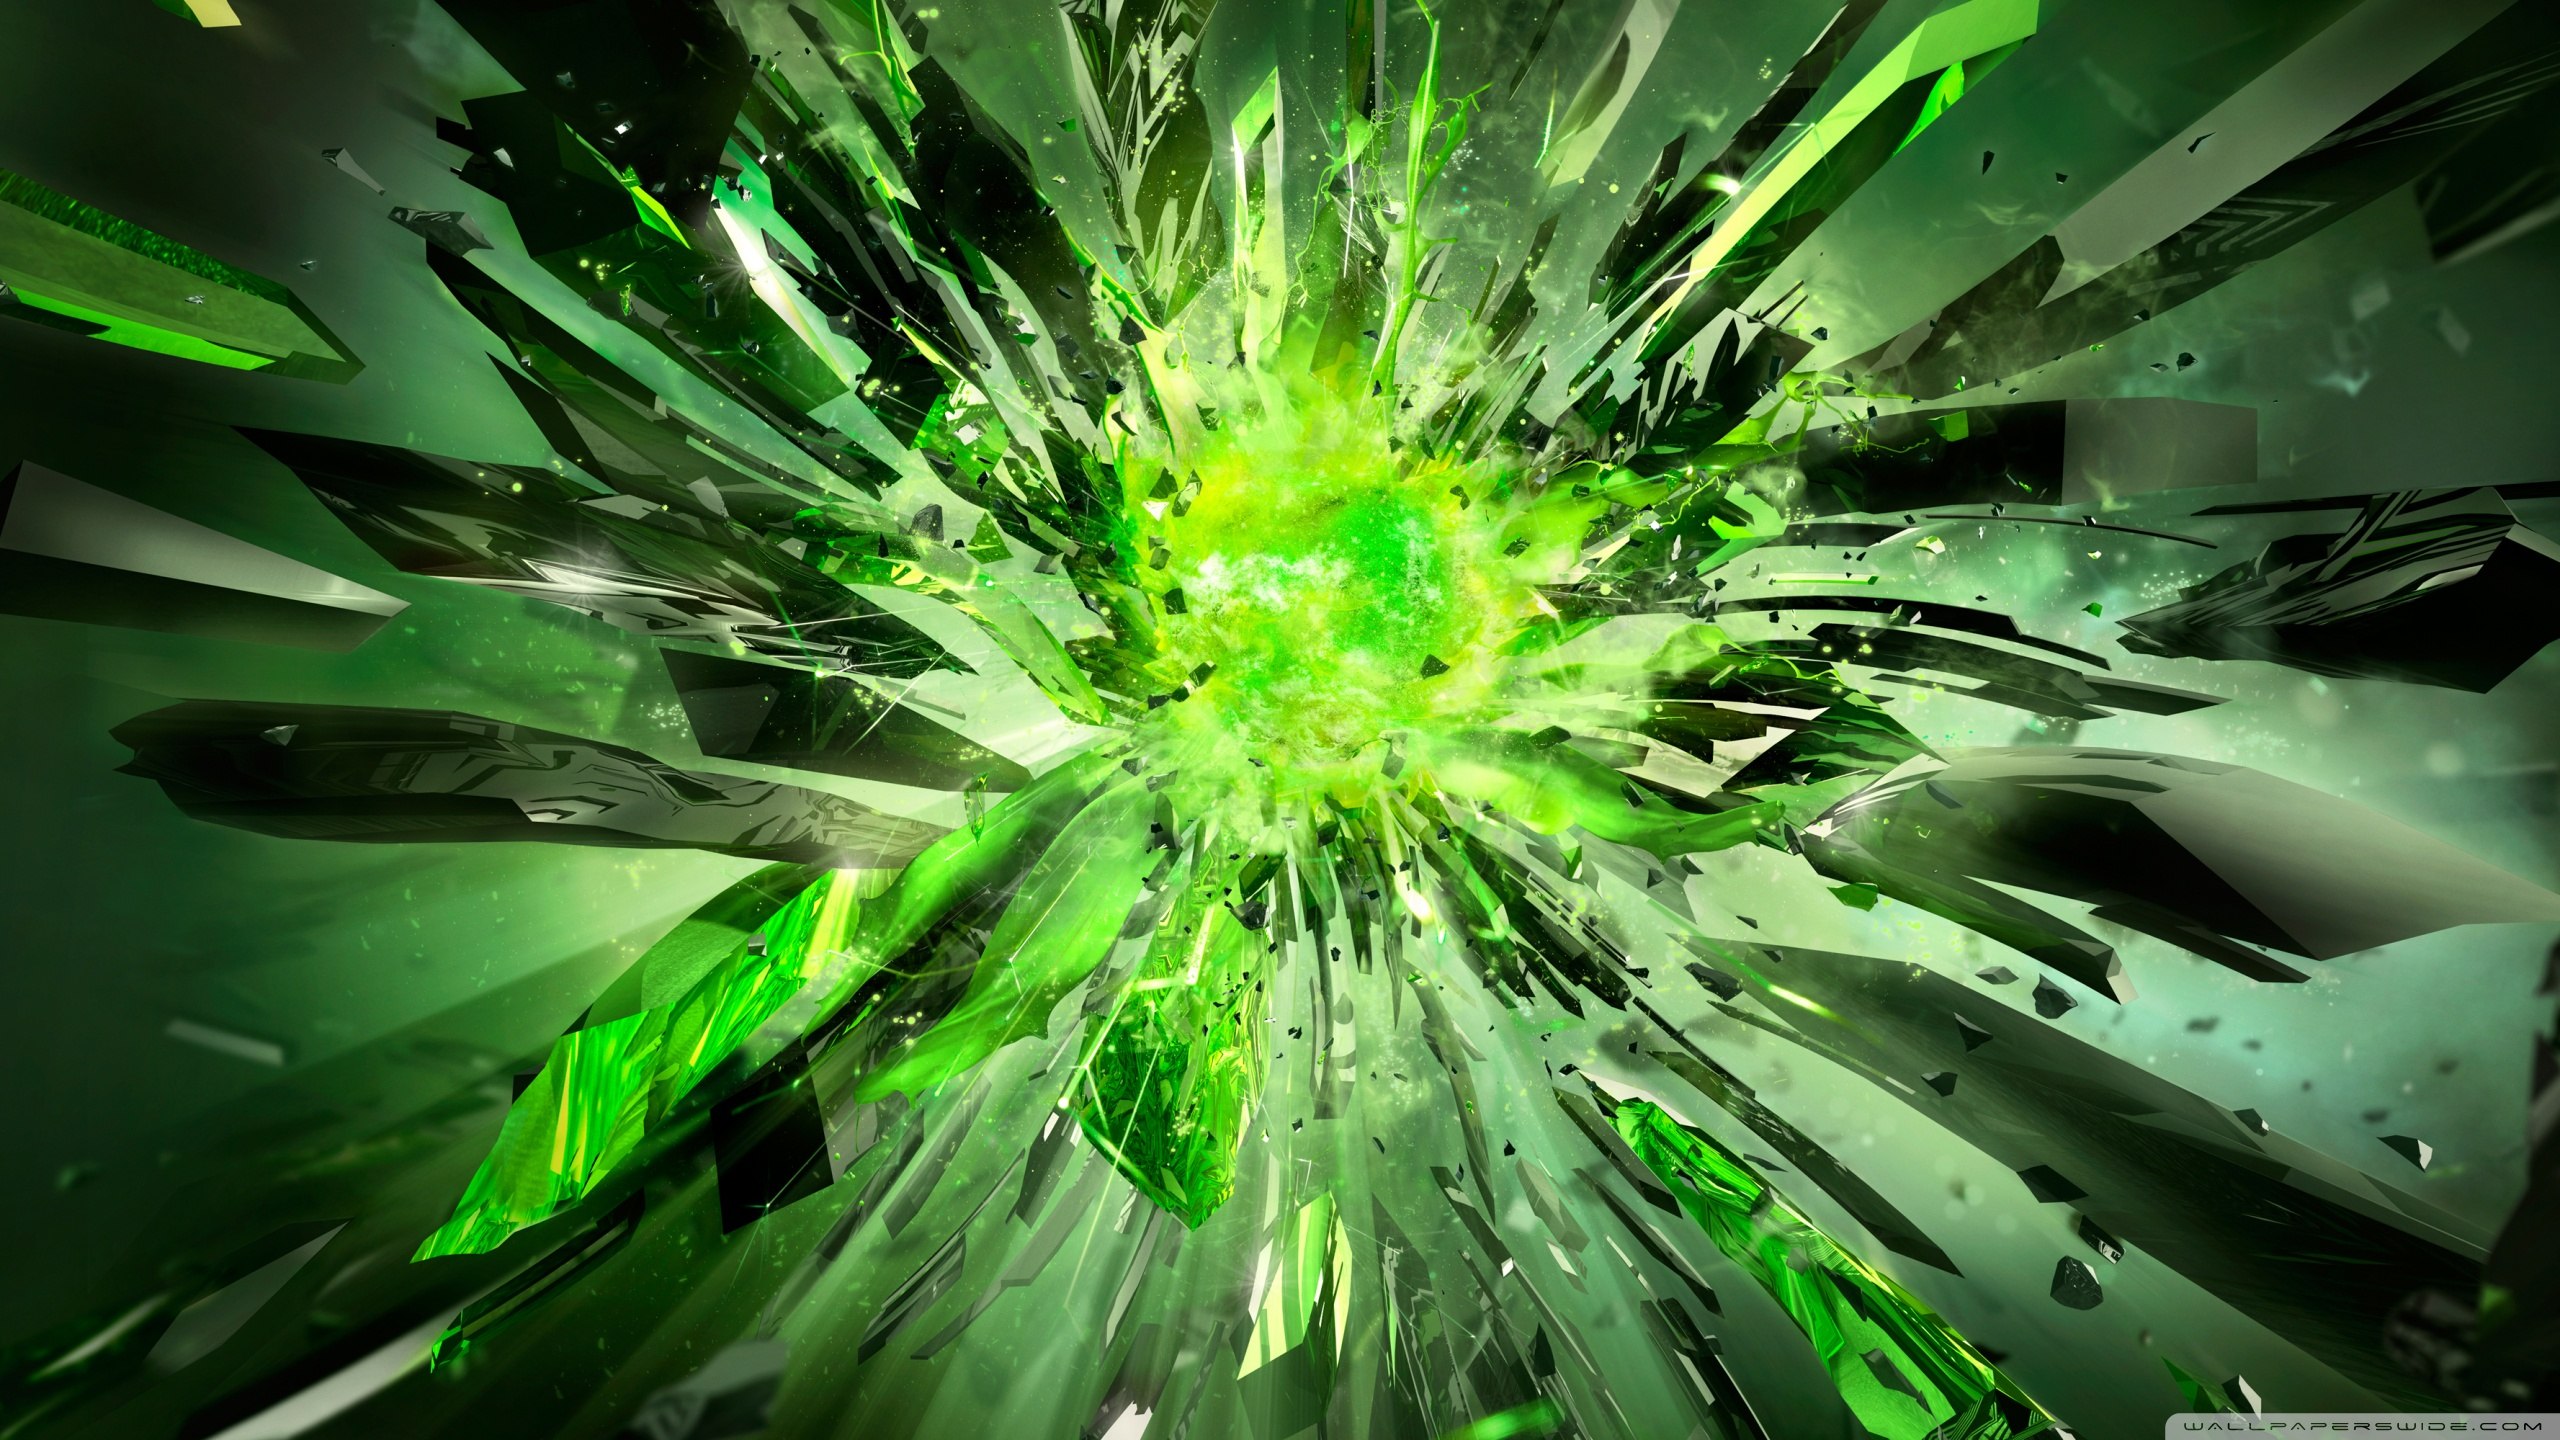 Green Wallpaper High Quality And Resolution